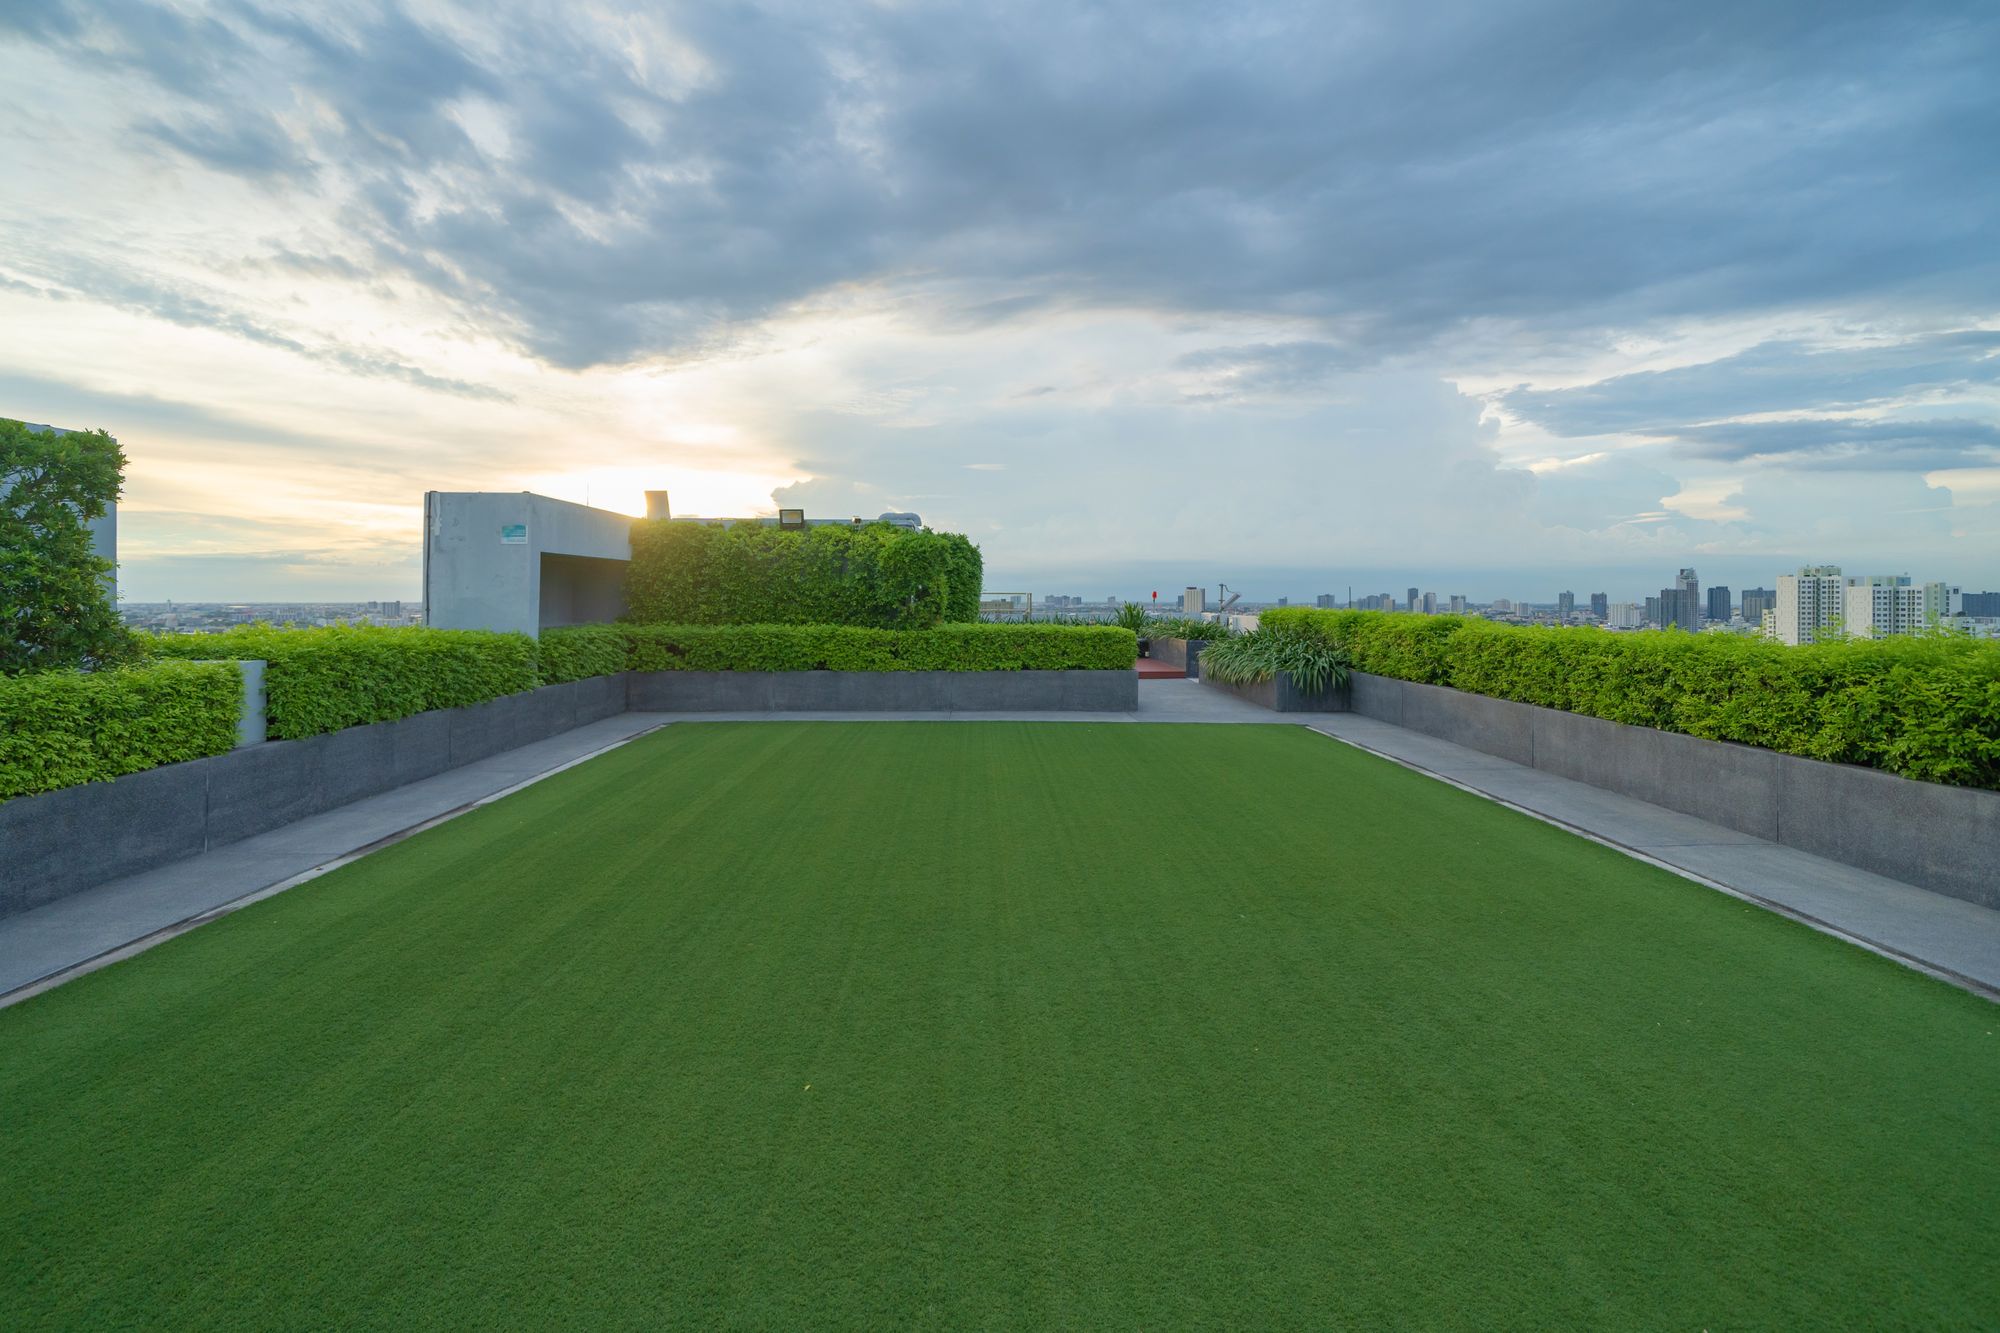 A picture of a turf field on a roof with the sky in the background.